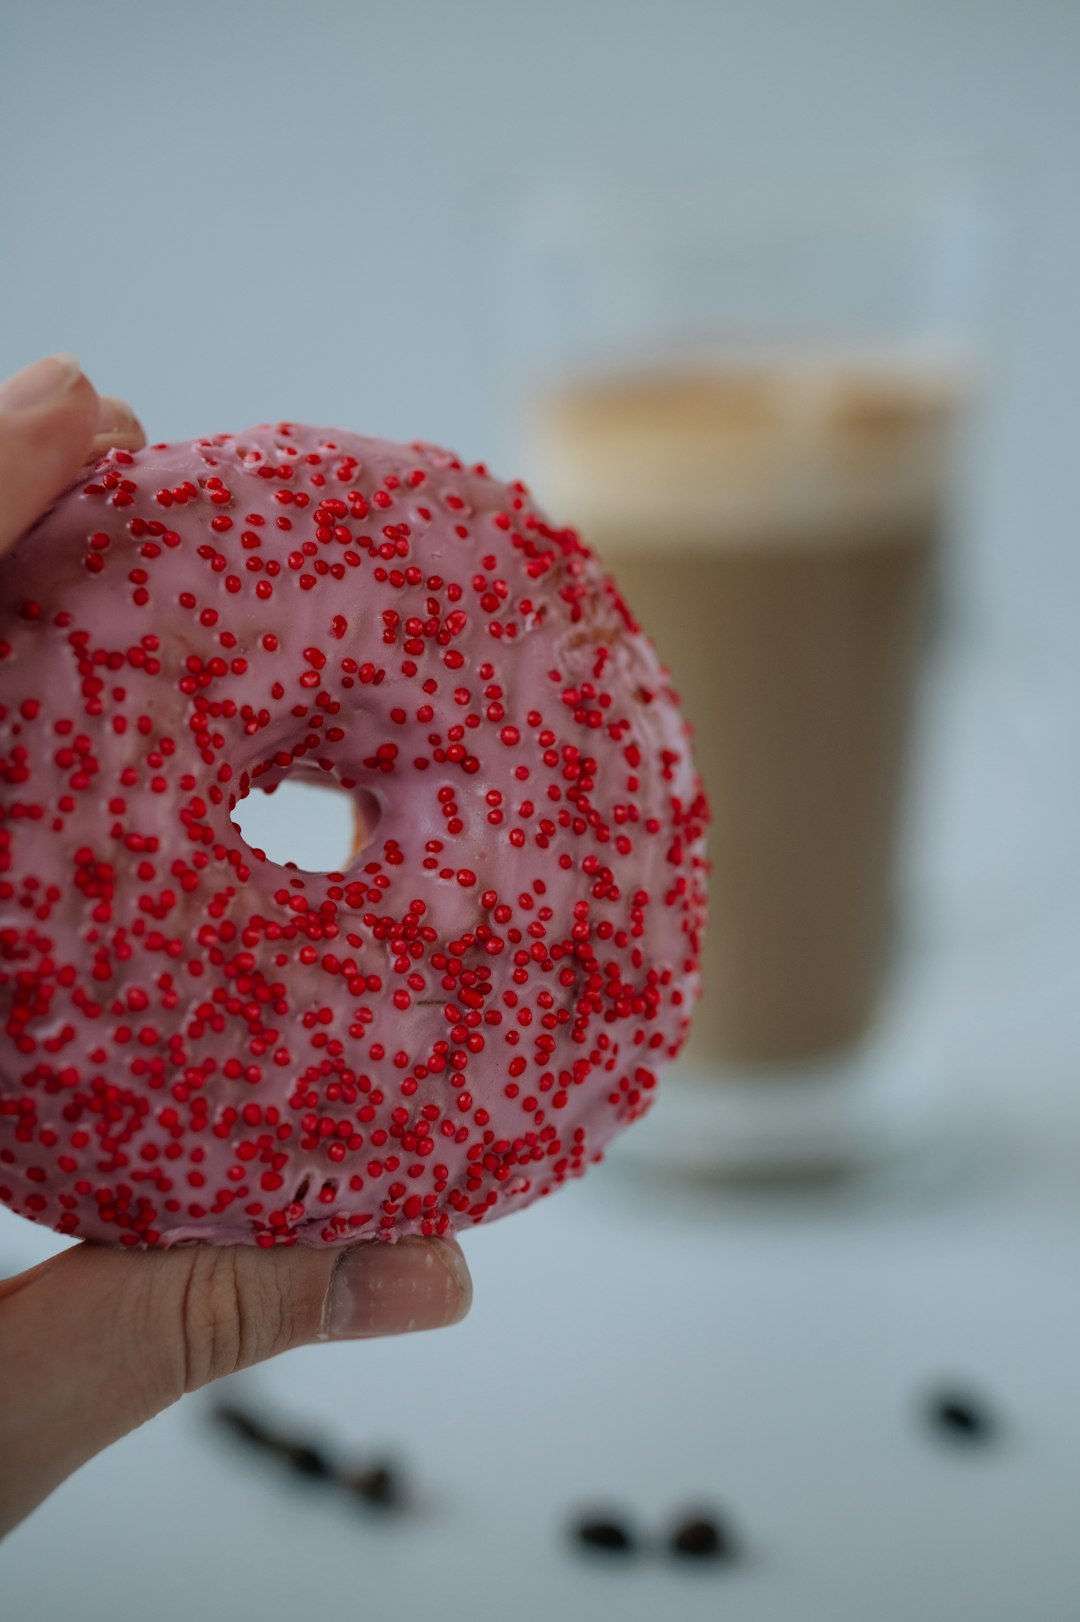 person holding doughnut with red and white sprinkles